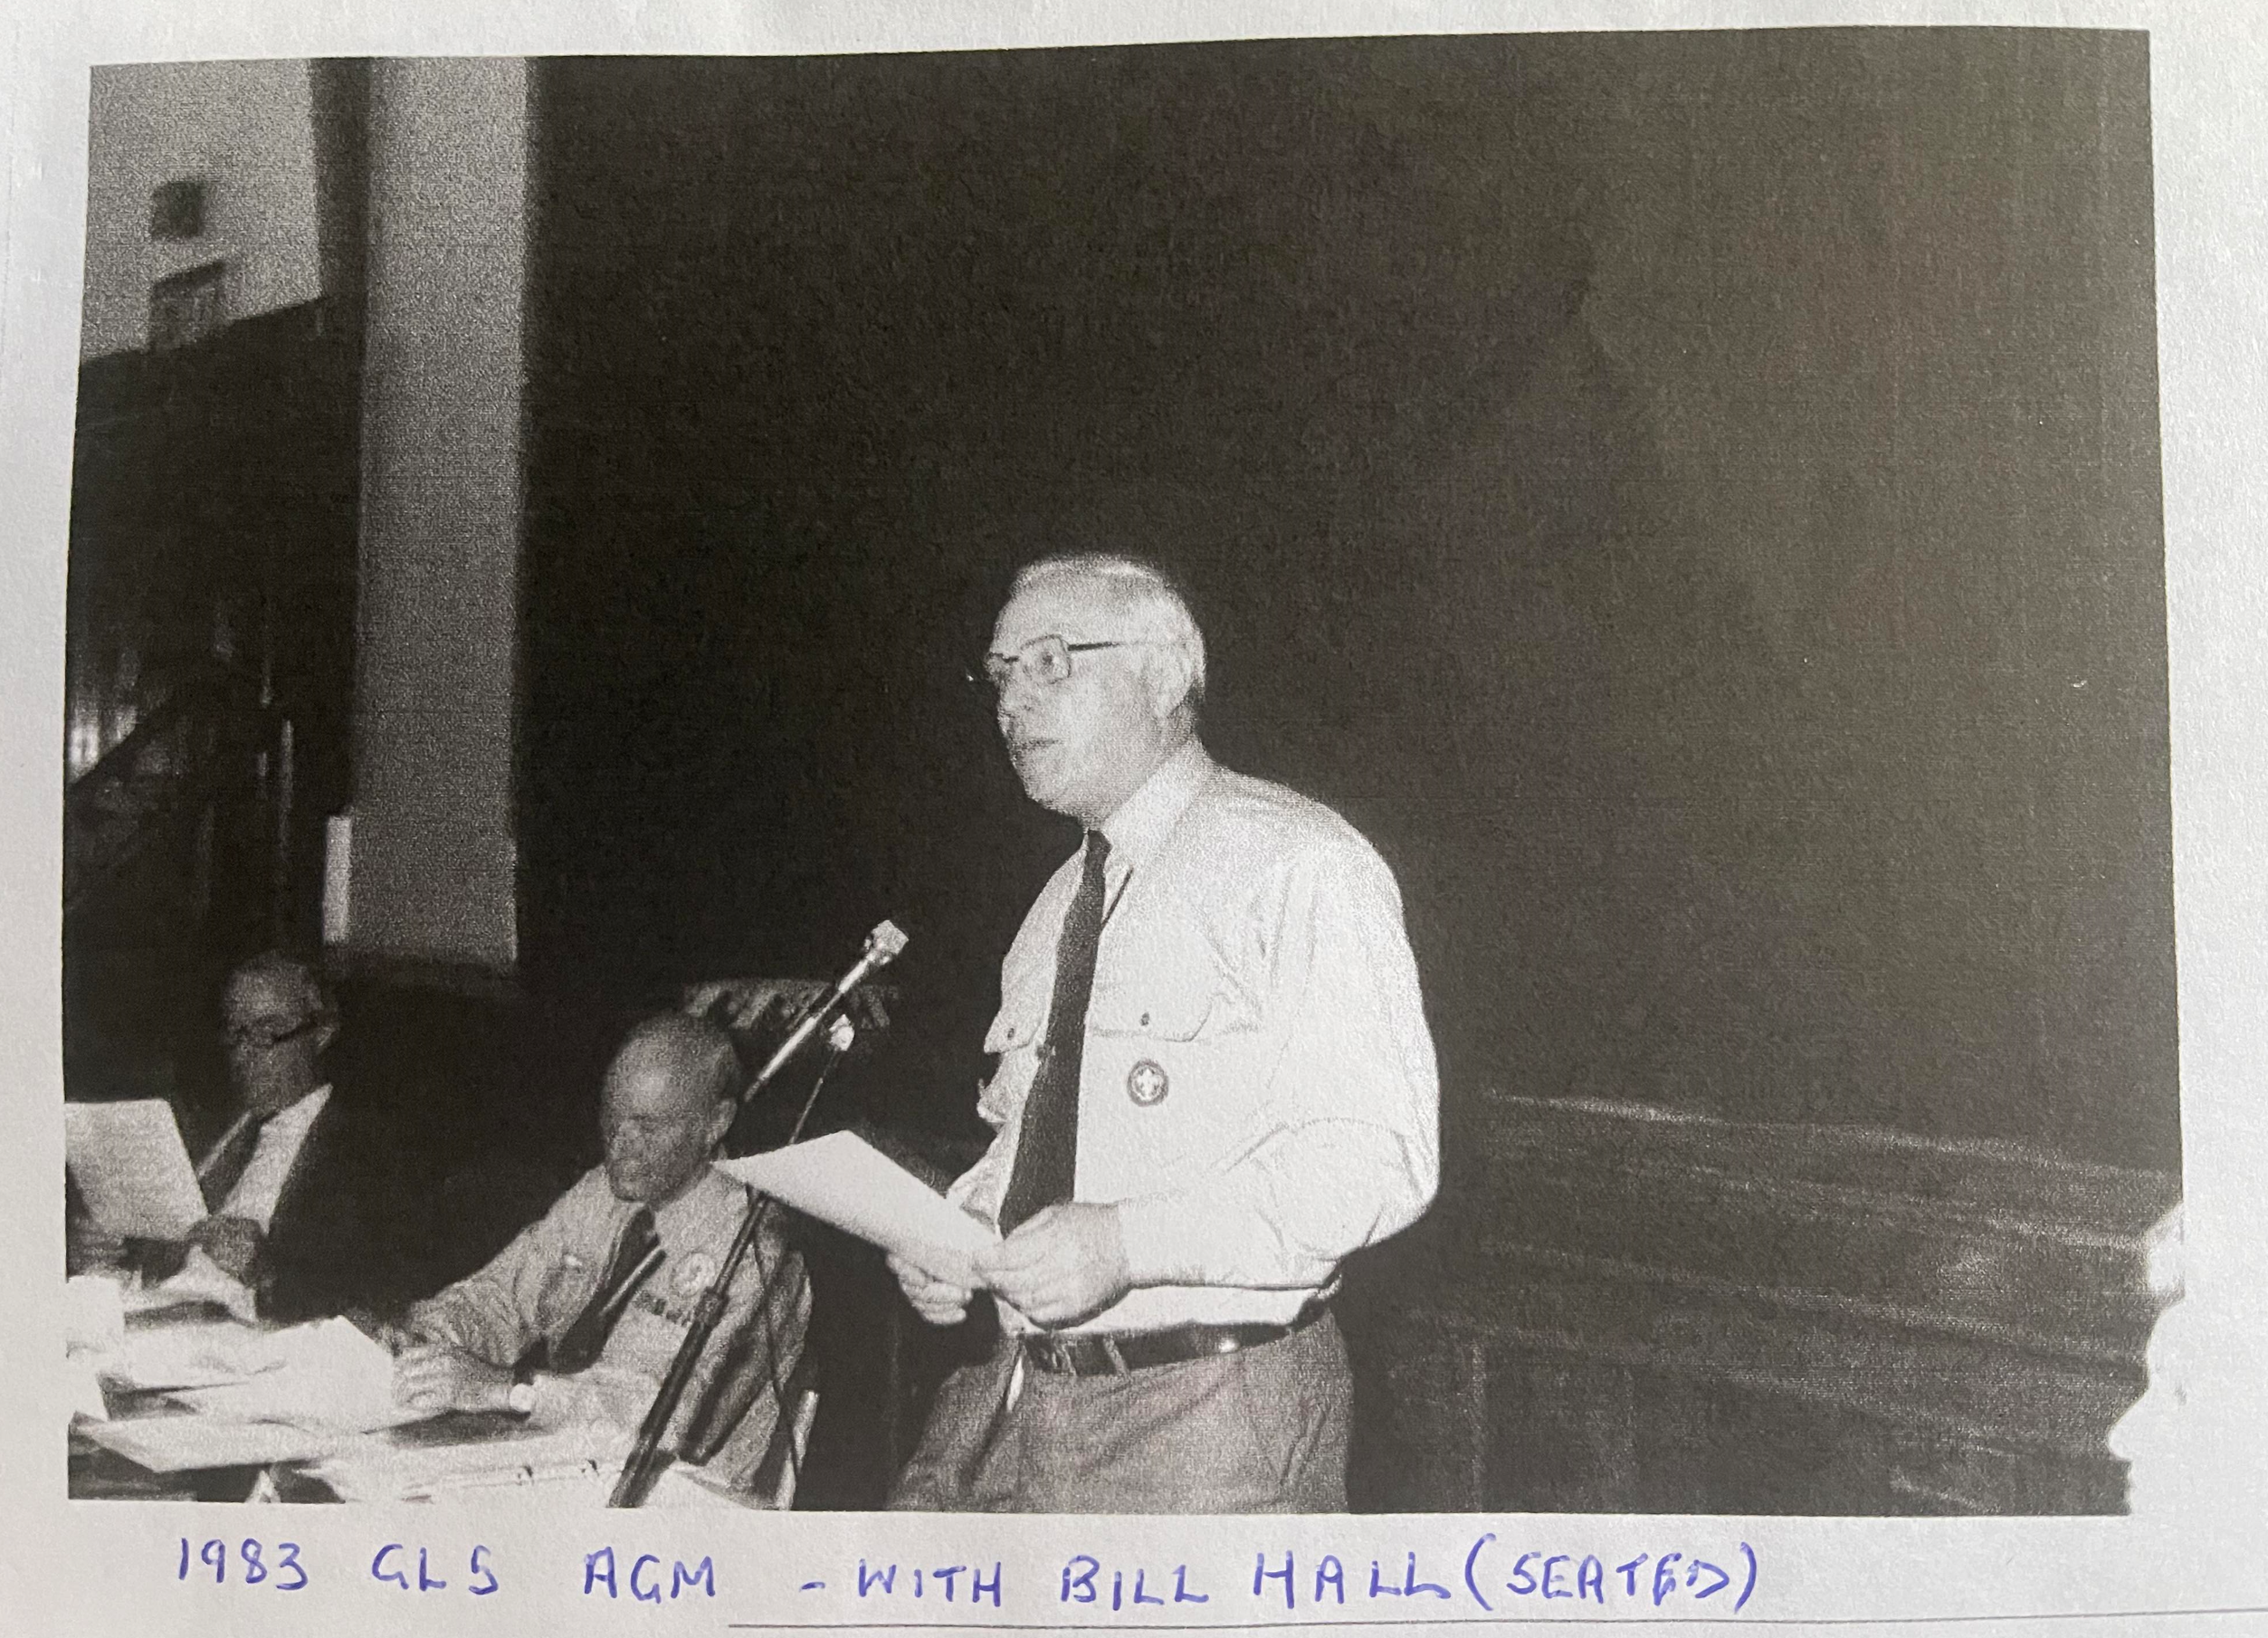 Bill at the 1983 County AGM